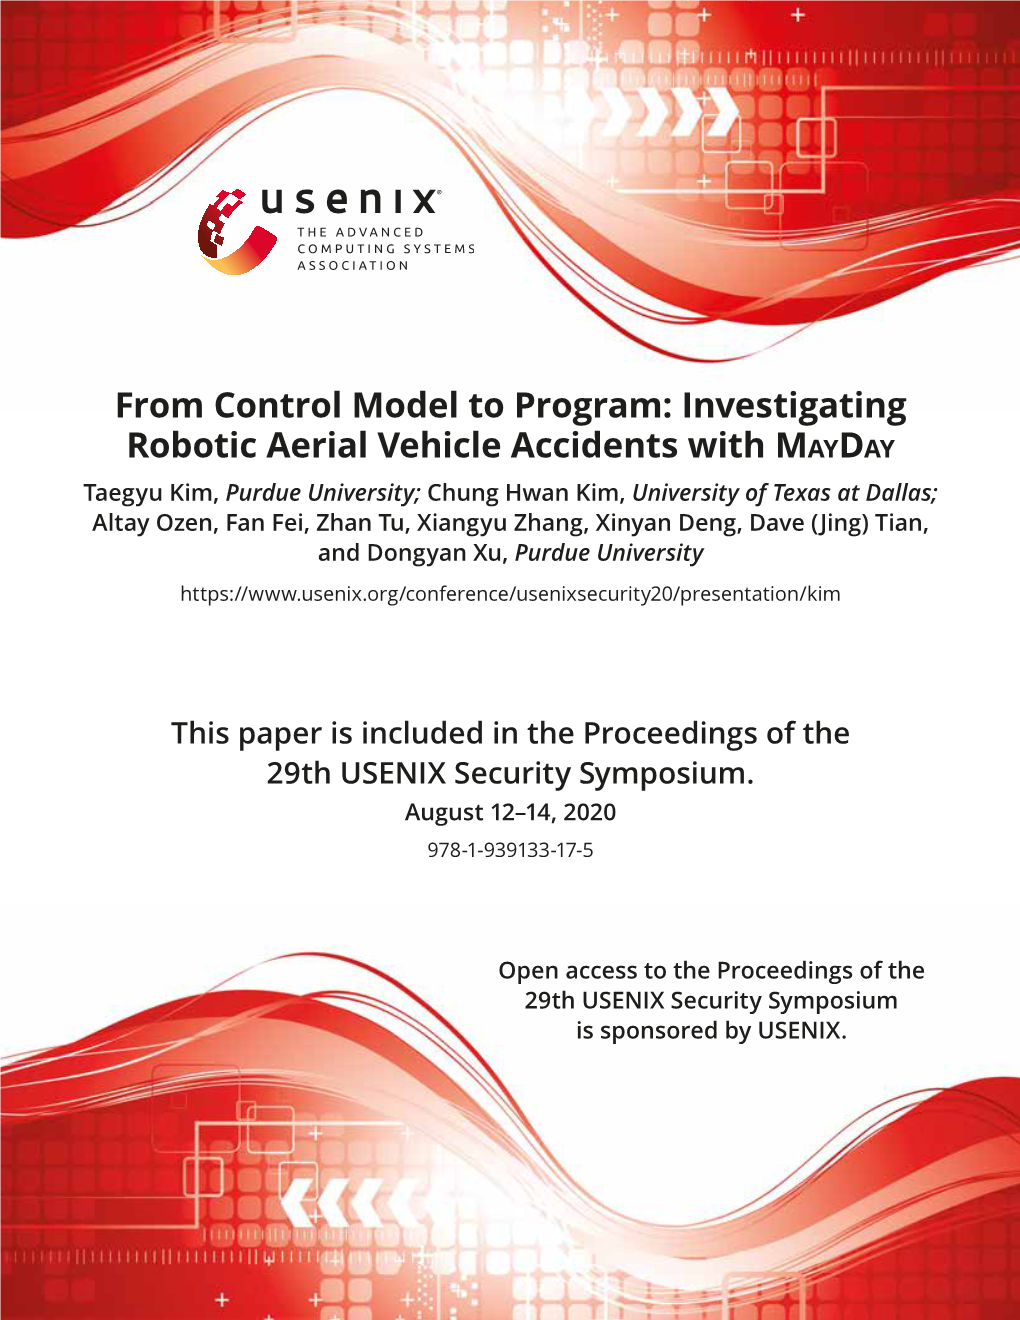 From Control Model to Program: Investigating Robotic Aerial Vehicle Accidents with Mayday